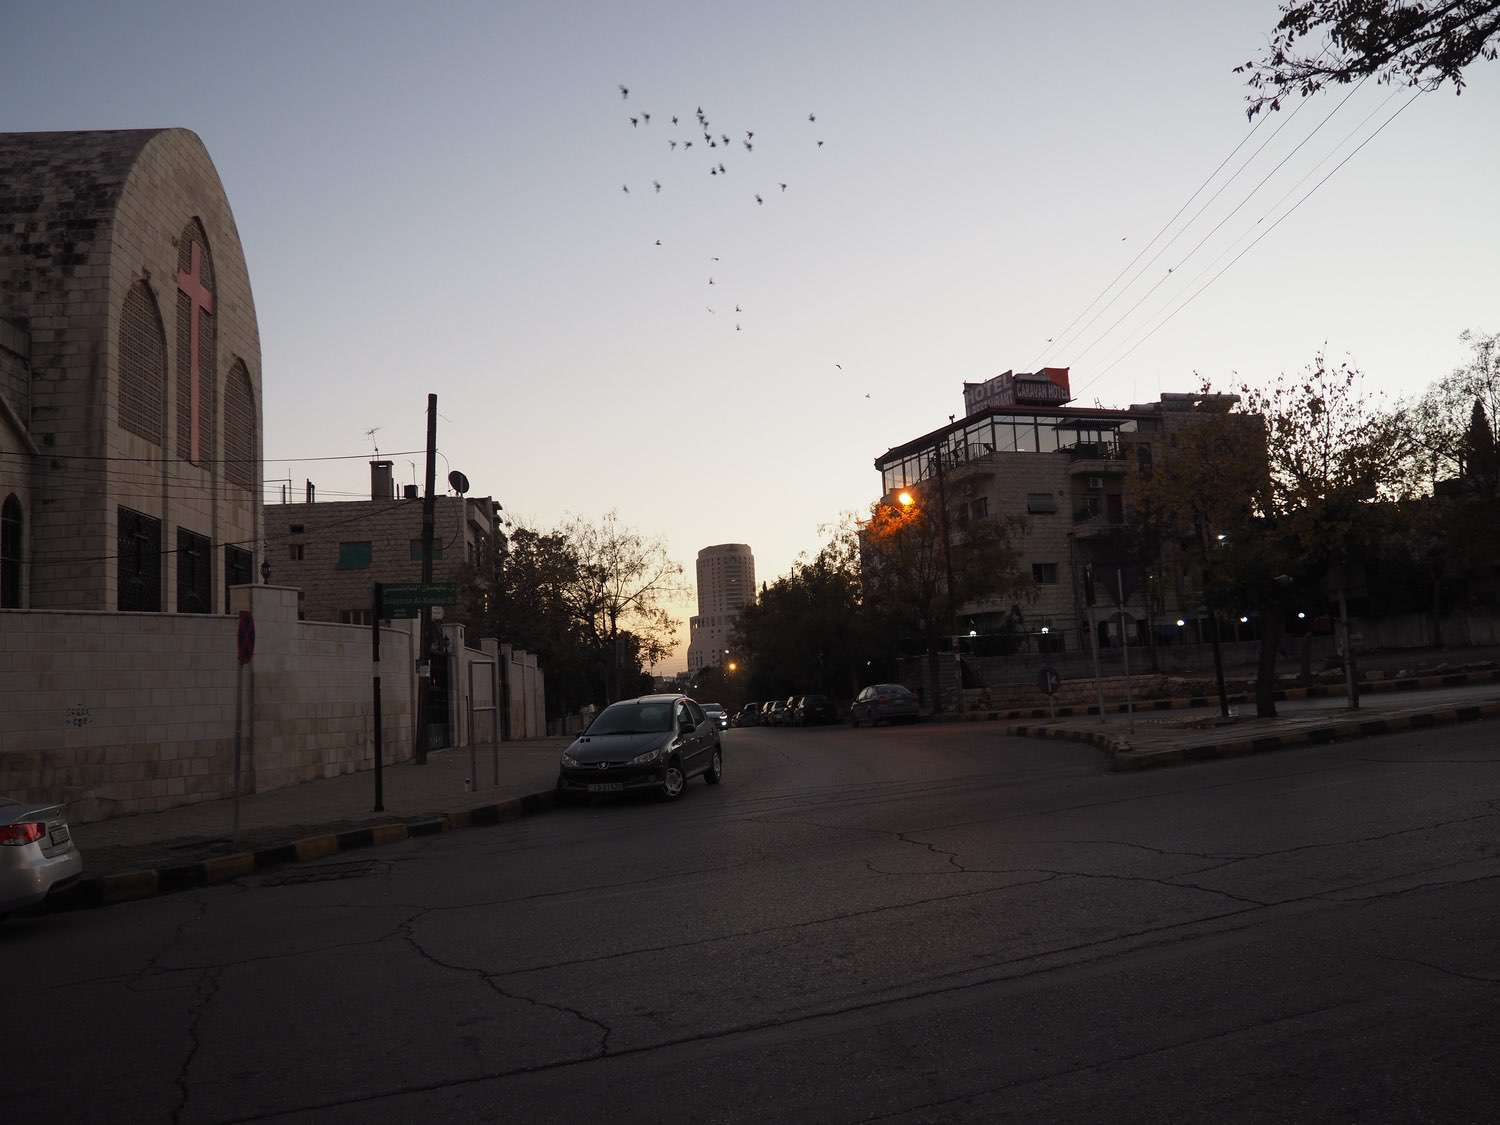 View down Ibn Hazen al-Andalusi St past the Coptic Orthodox Church toward the Le Royal Hotel